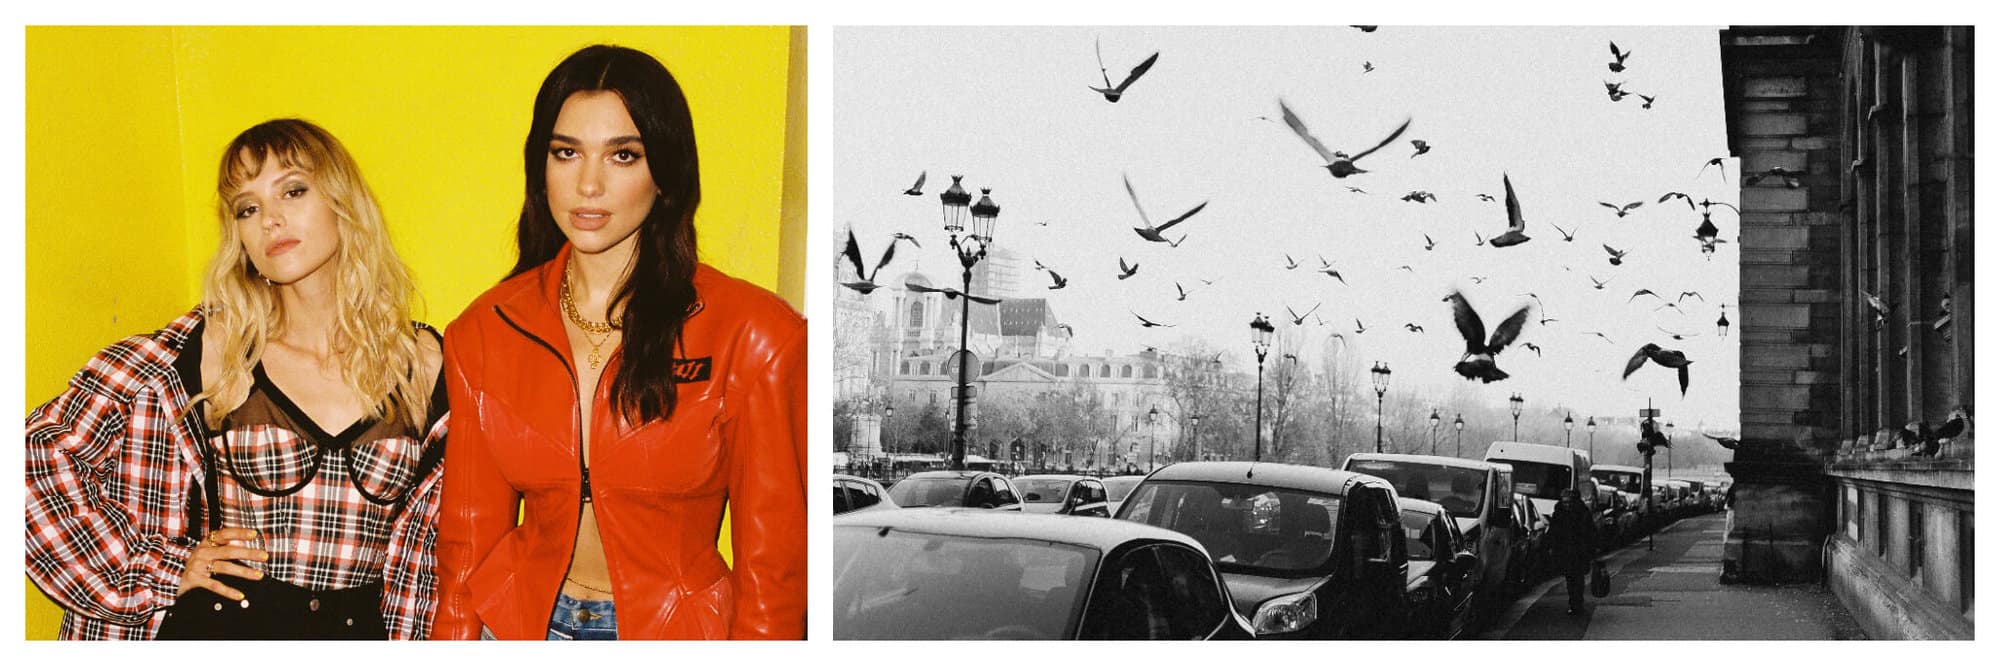 Left: Angele and Dua Lipa standing next to each other, in front of a yellow wall. Right: Birds flying on an empty street in Paris.